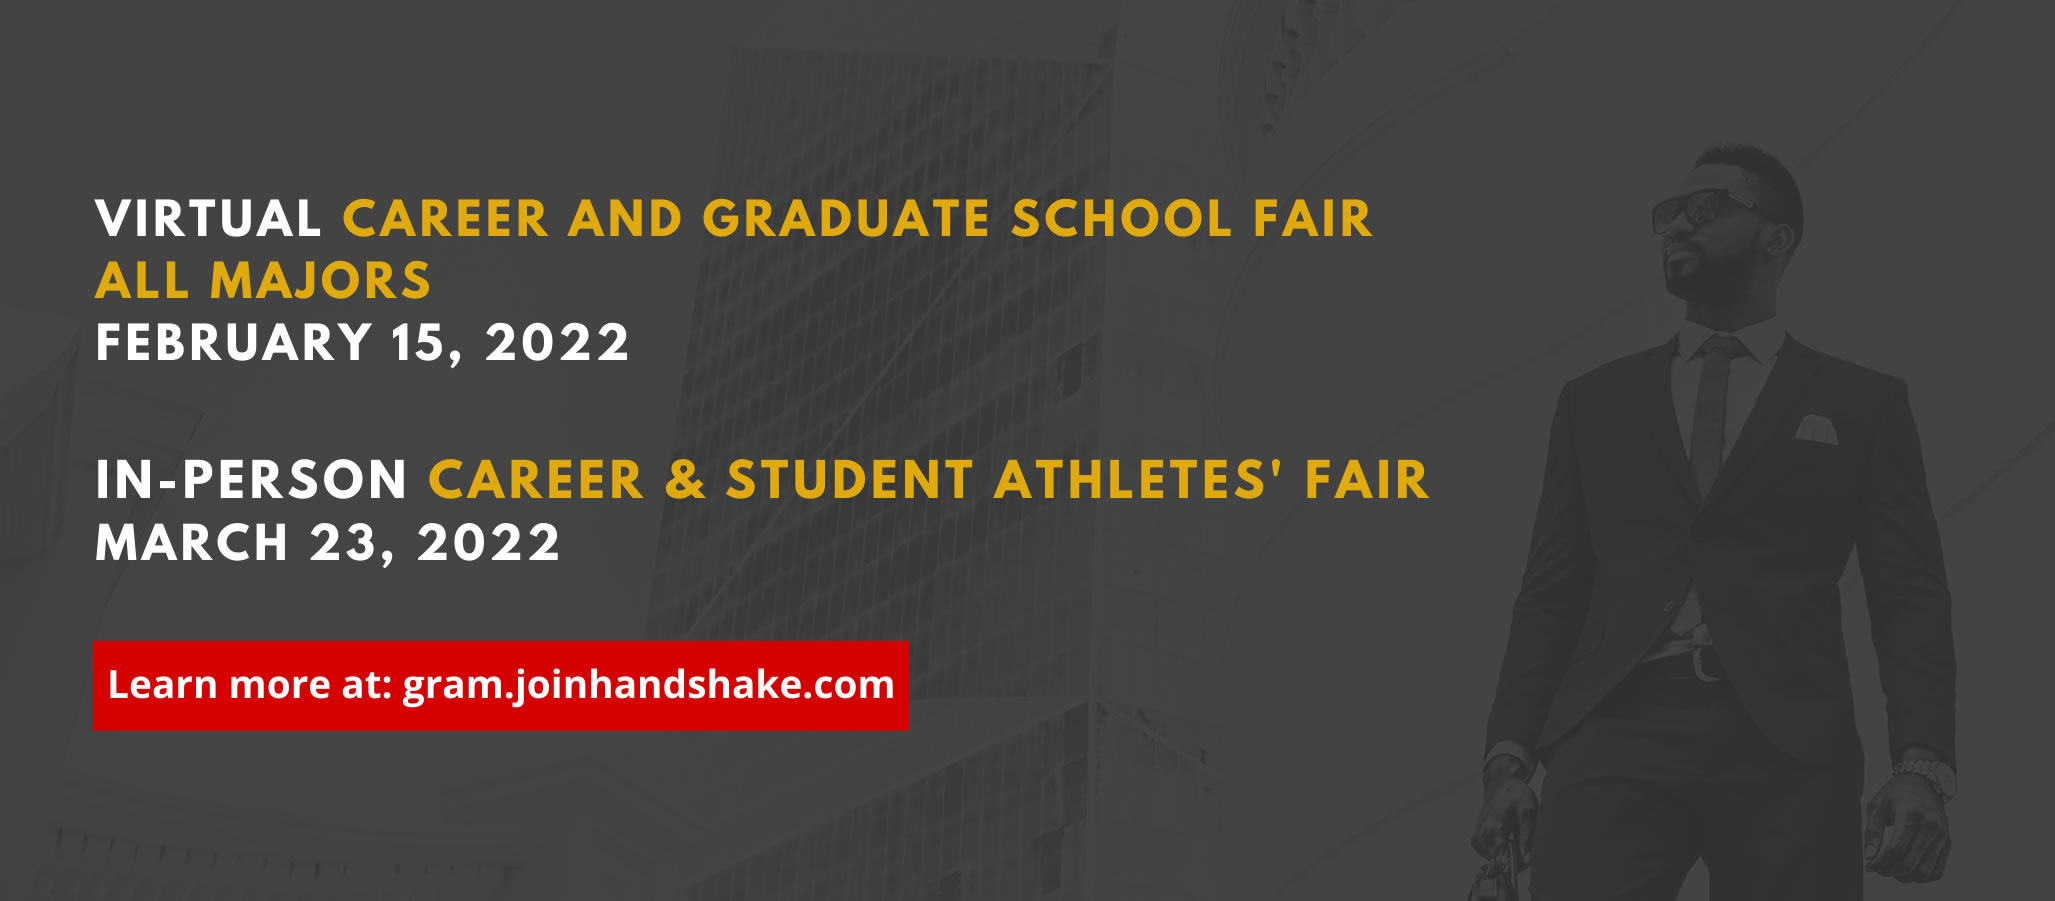 Virtual Career Fair and Gruaduate School Fair for All Majors - Feb. 15, In-Person Career and Student Athlete's Fair - Mar. 23, Learn more at: gram.joinhandshake.com